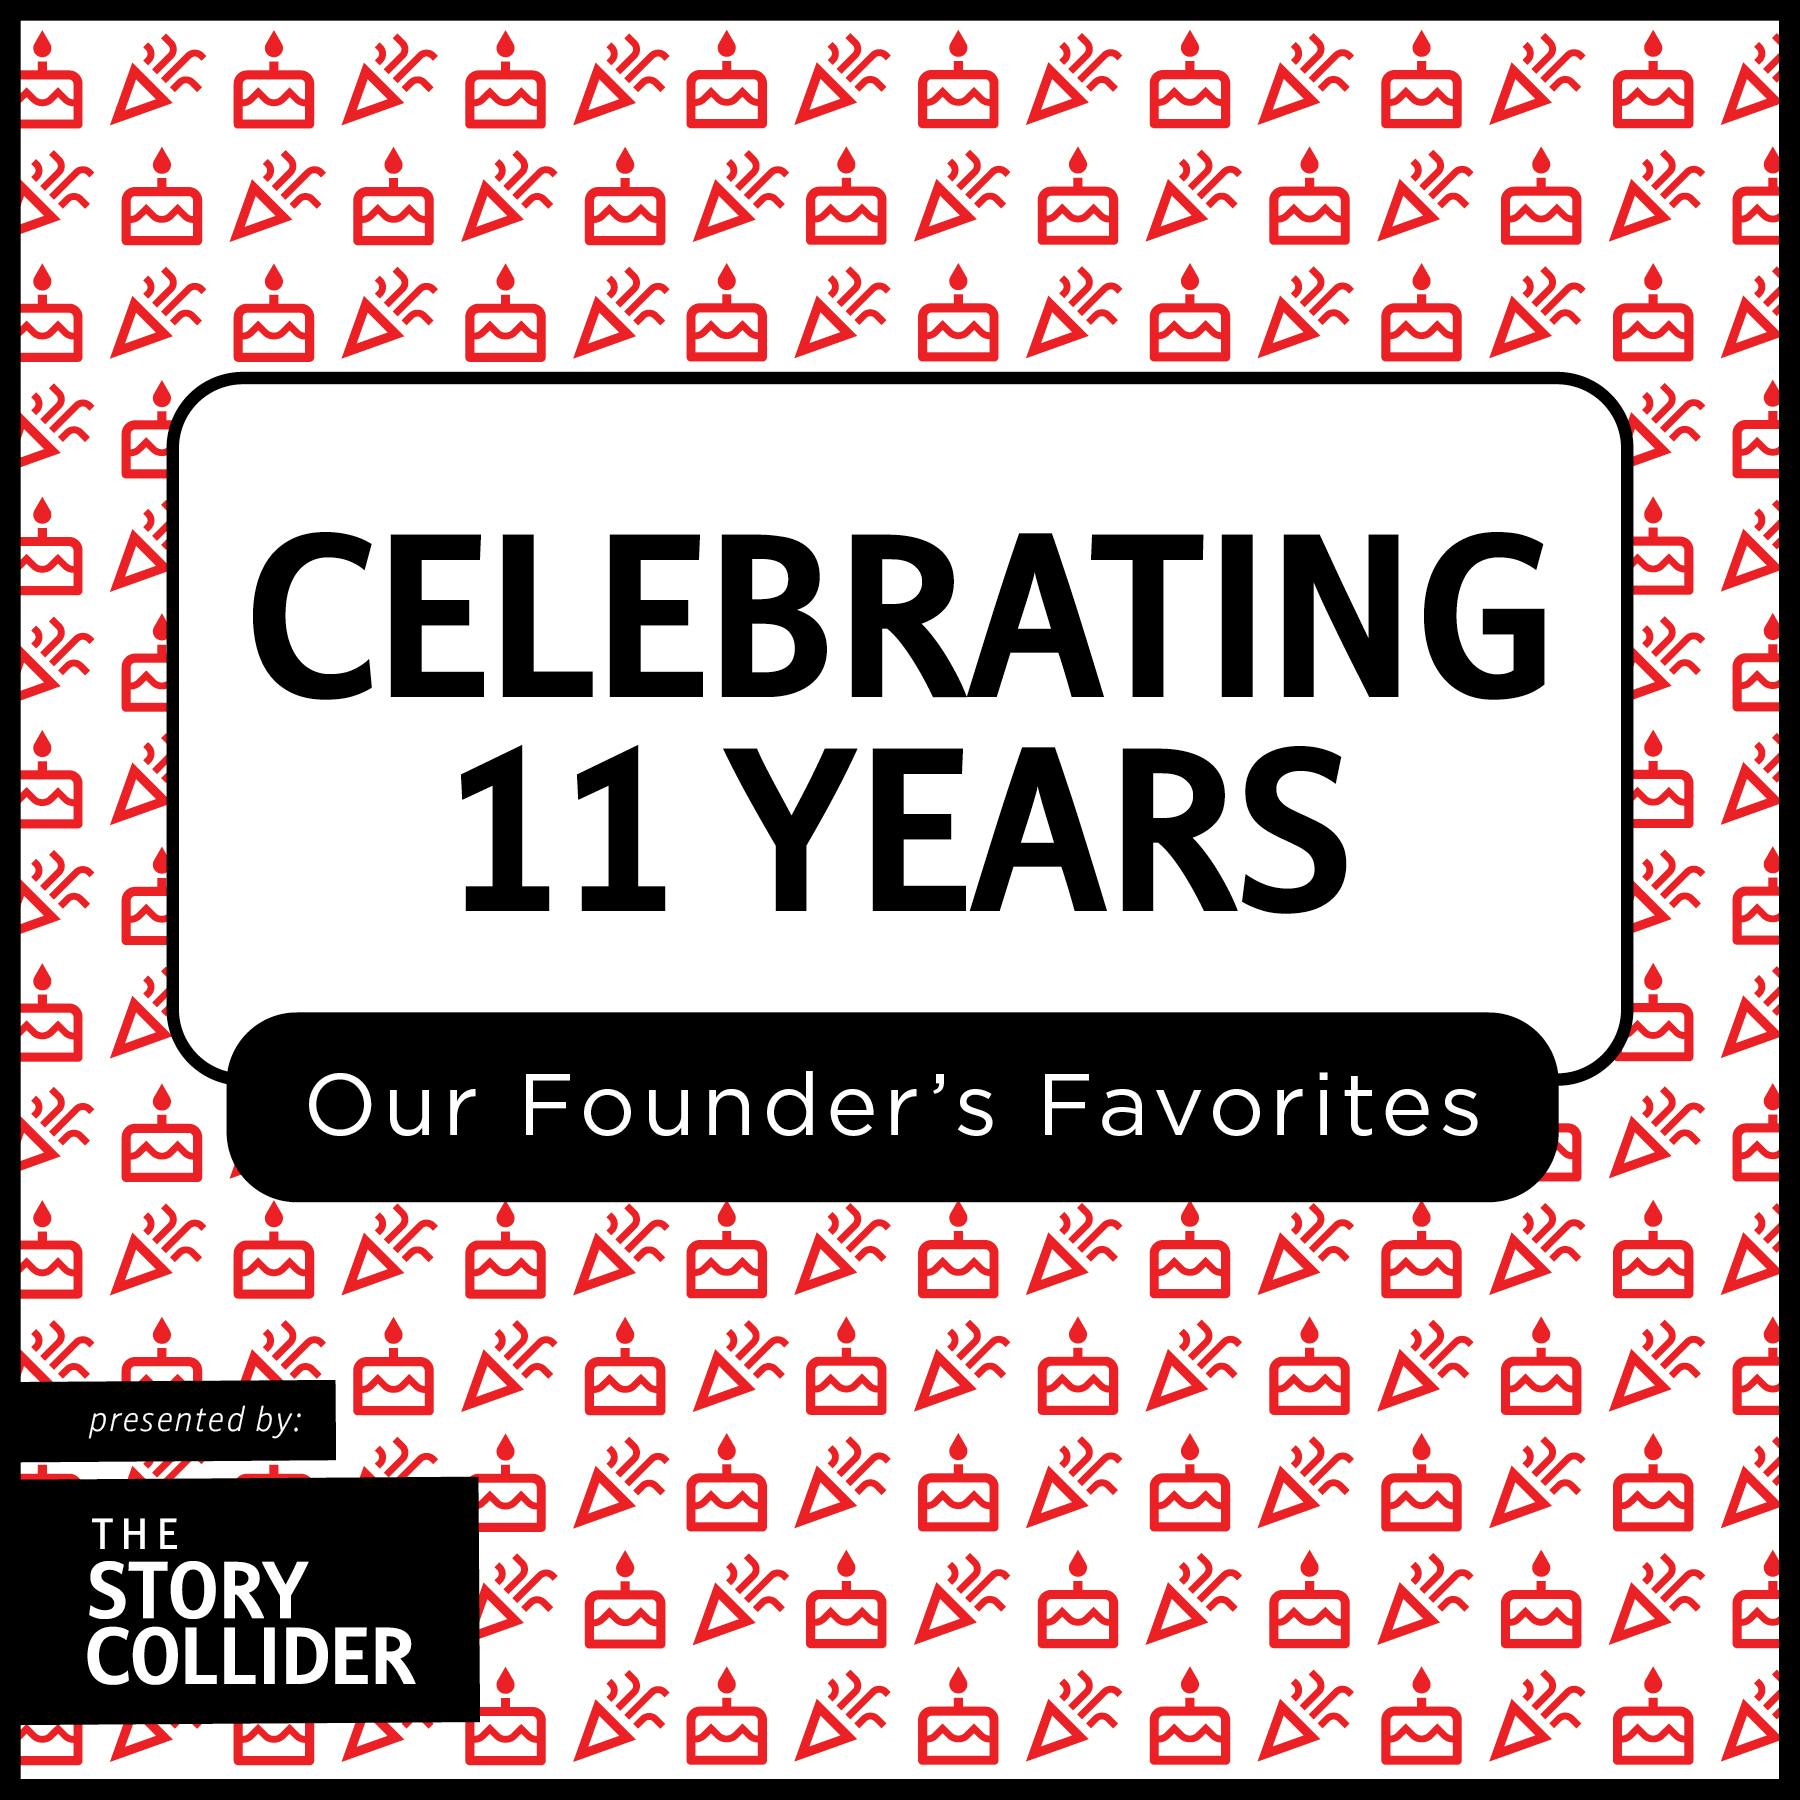 Celebrating 11 Years: Our Founder's Favorites